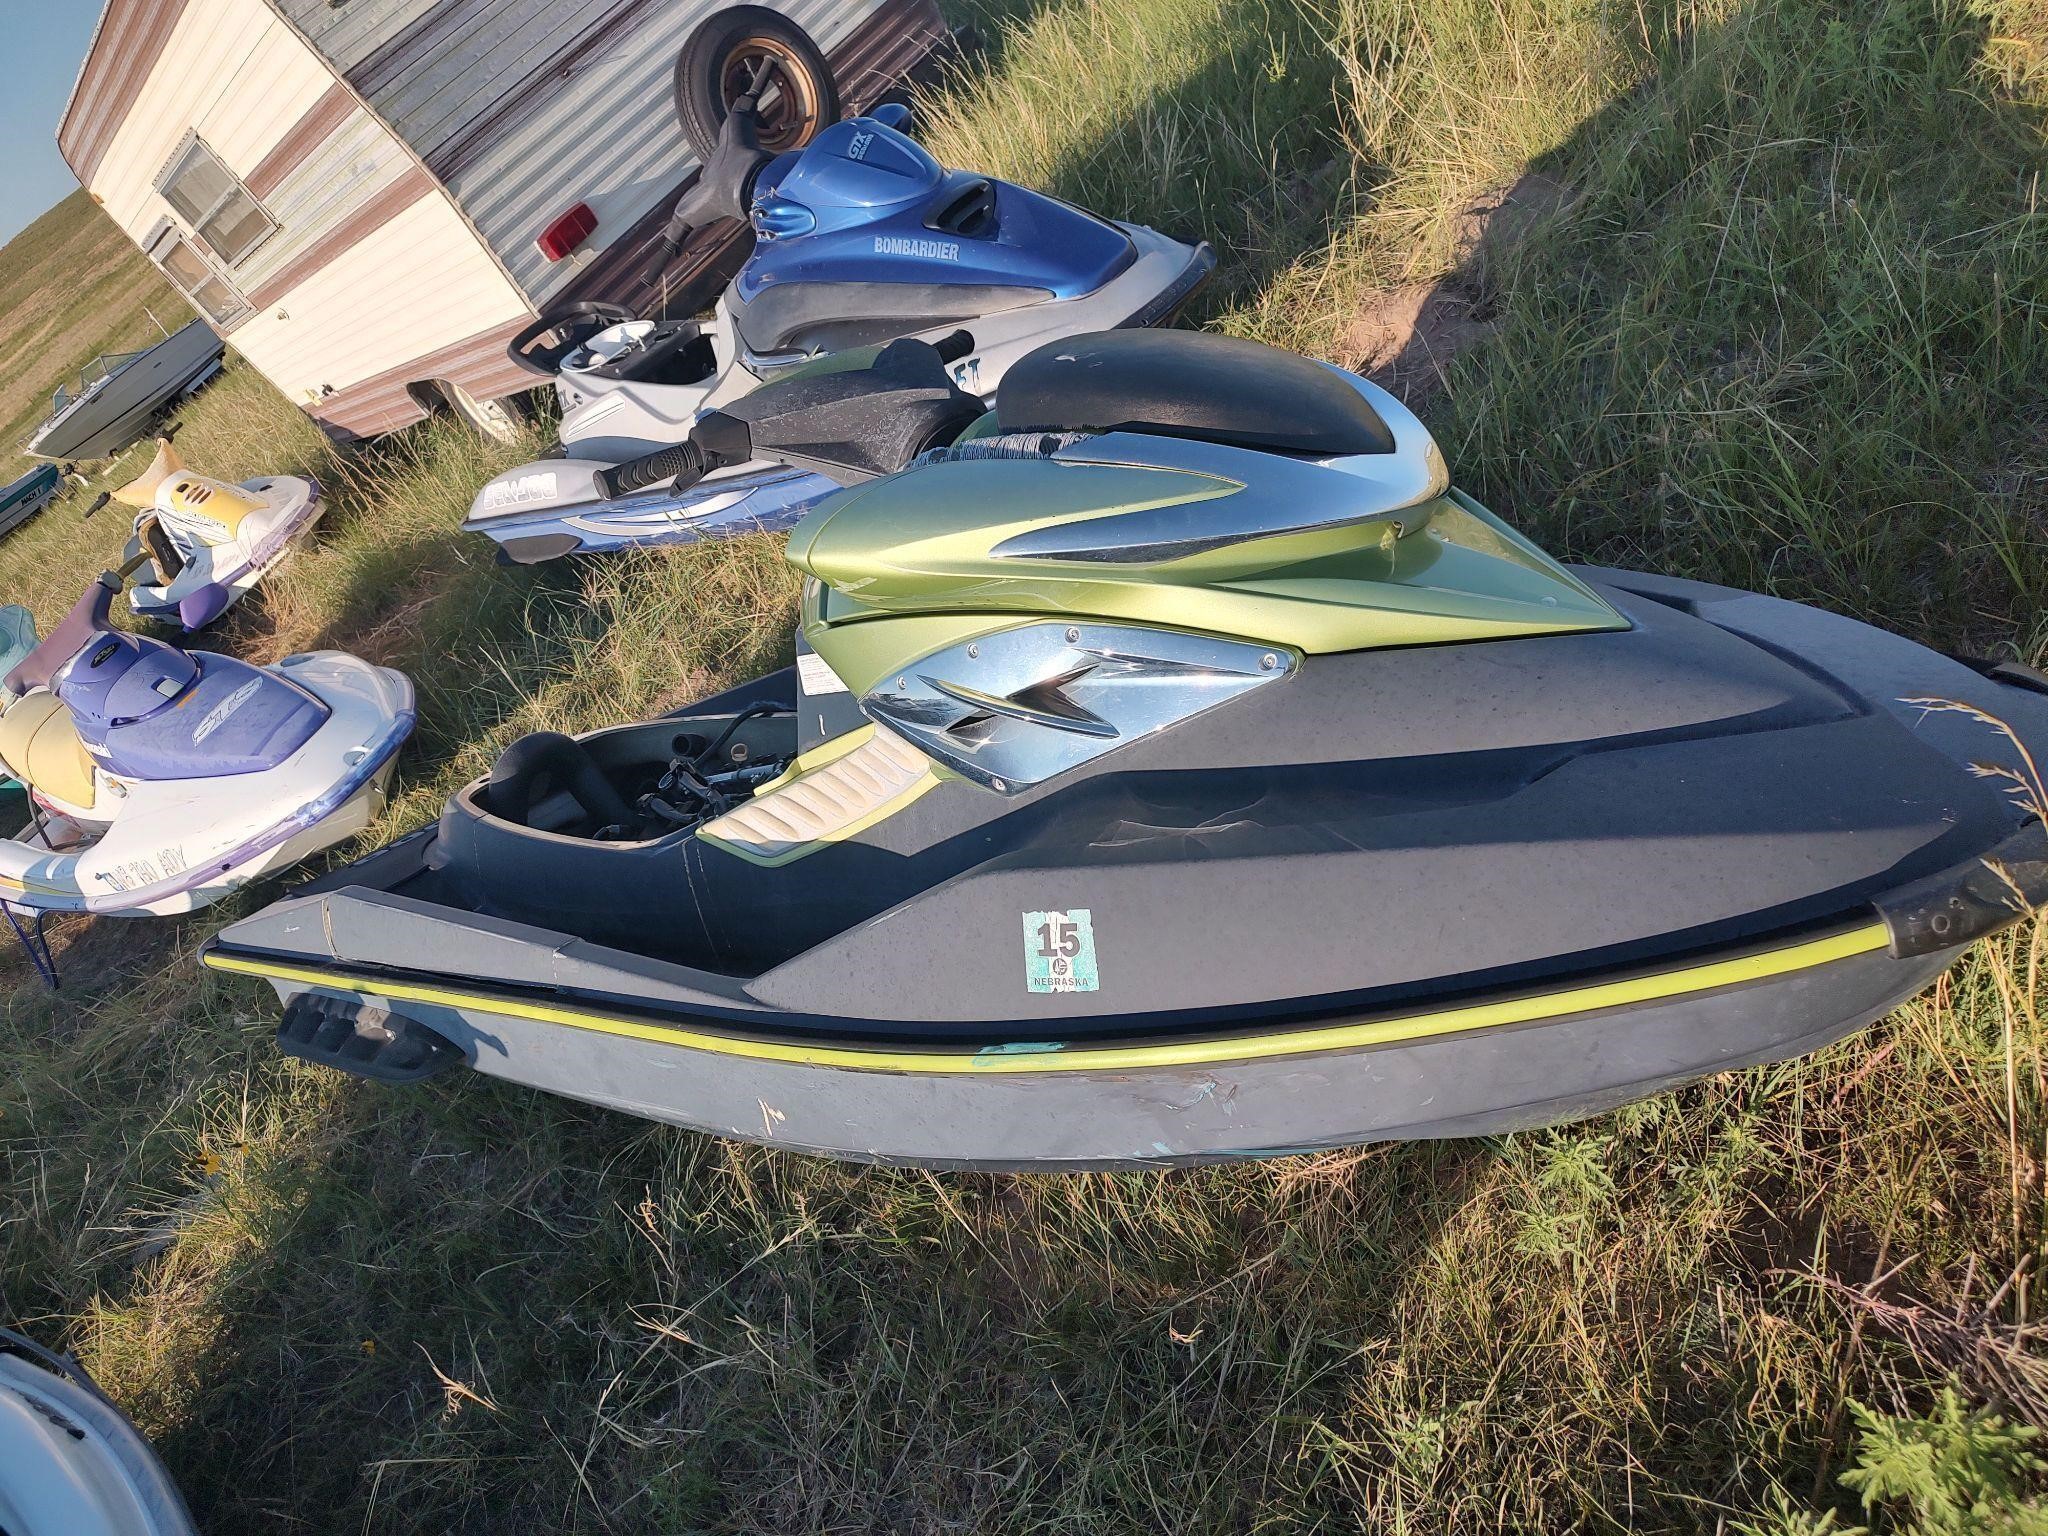 Fuel injection sea Doo for parts only